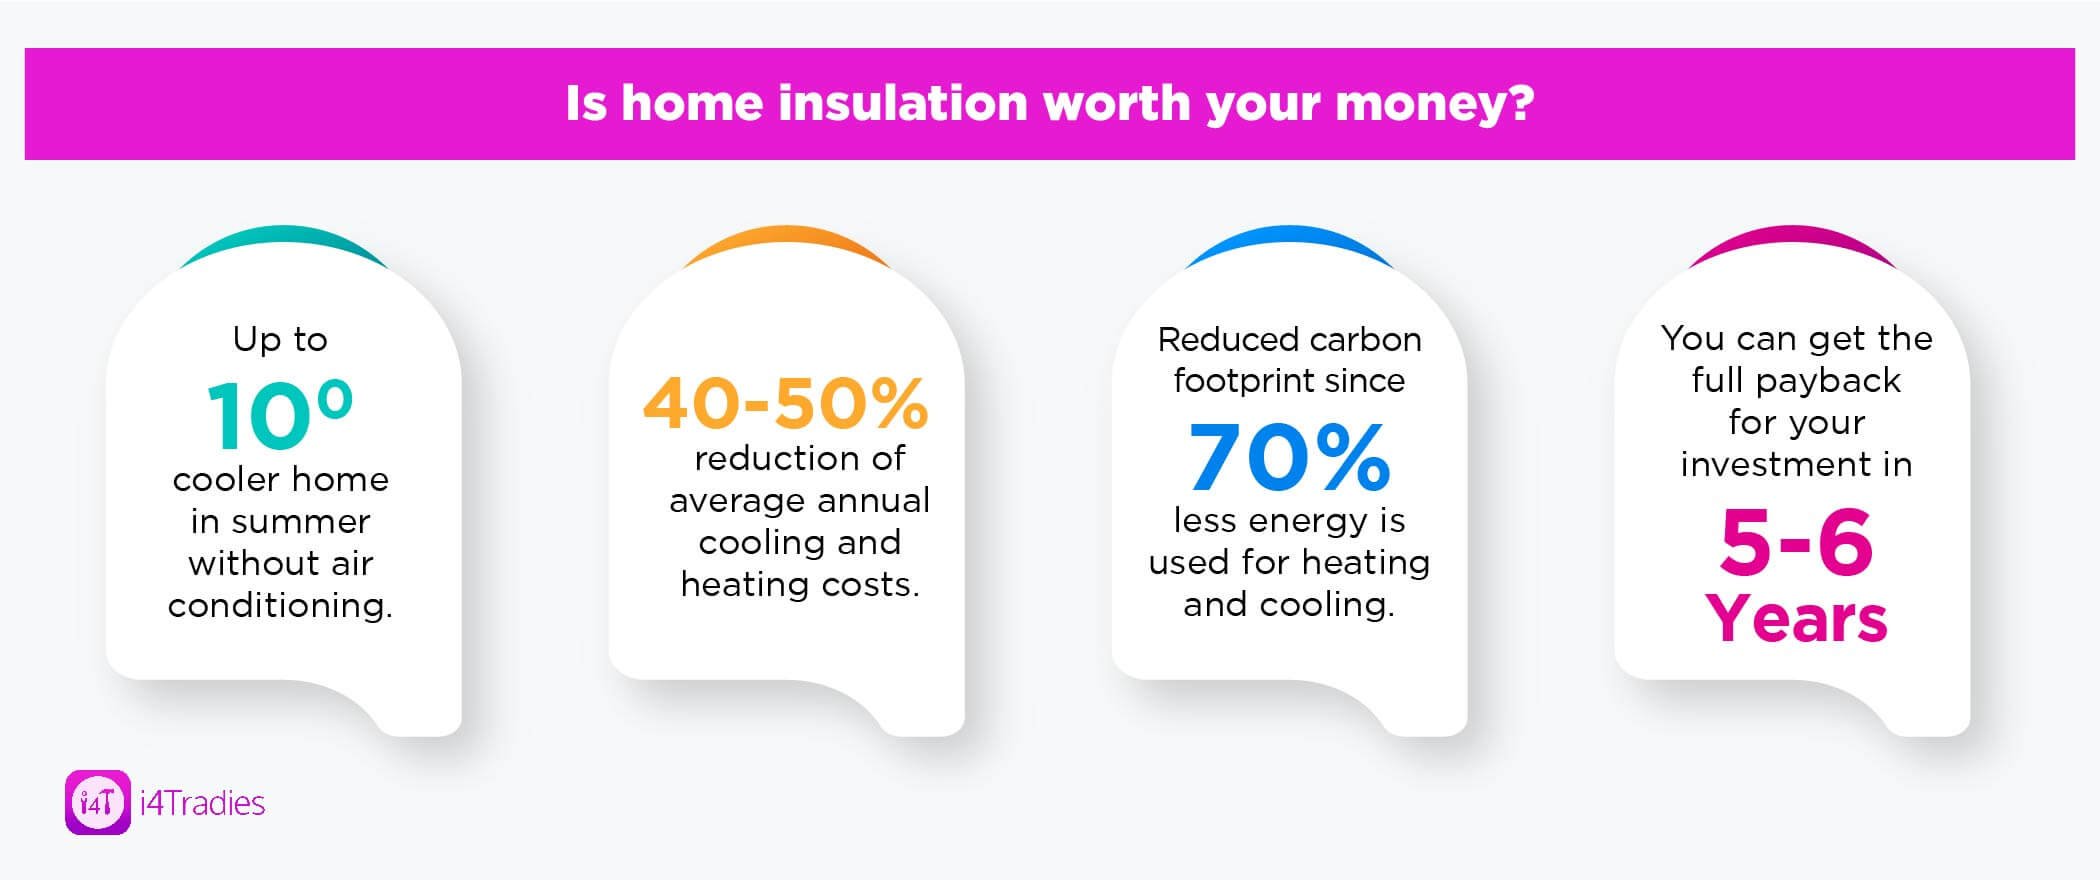 Is home insulation worth your money - i4Tradies